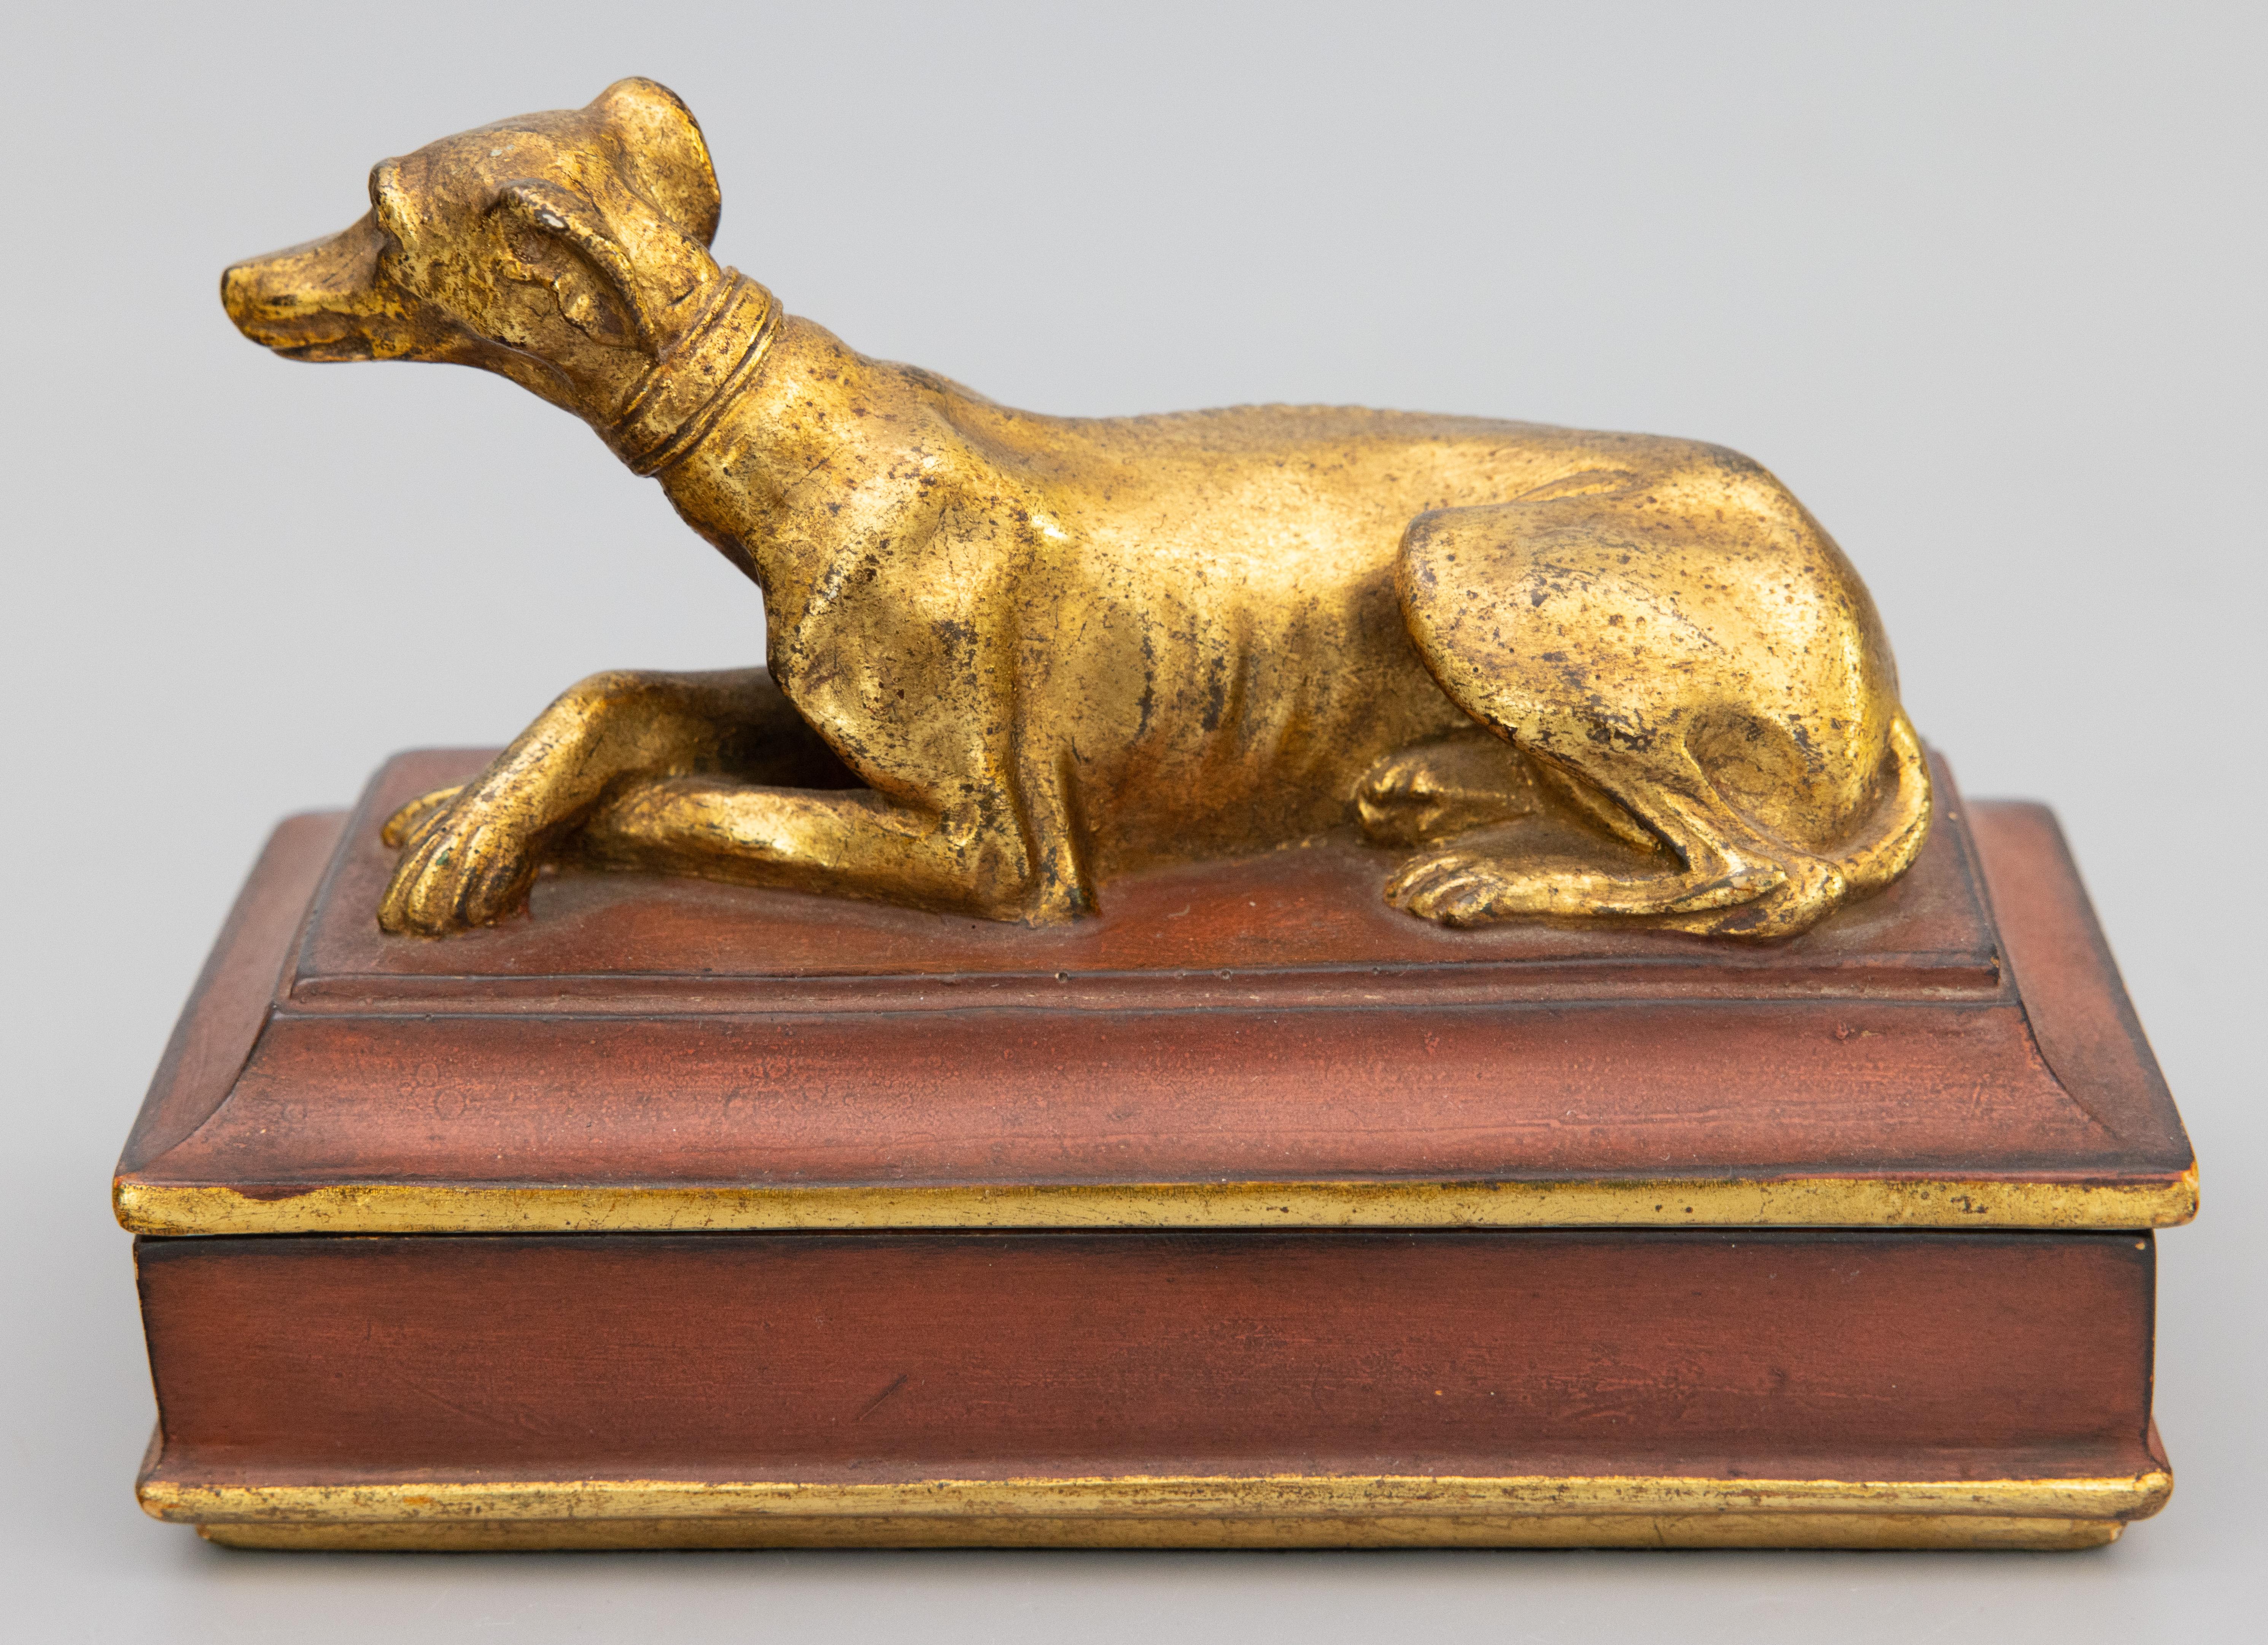 A very fine Italian Borghese plaster lidded box with a charming gilded dog, circa 1930. This would look stunning in an office or displayed as a desk accessory. It's ideal for keeping jewelry or other special belongings, perfect for the dog lover or